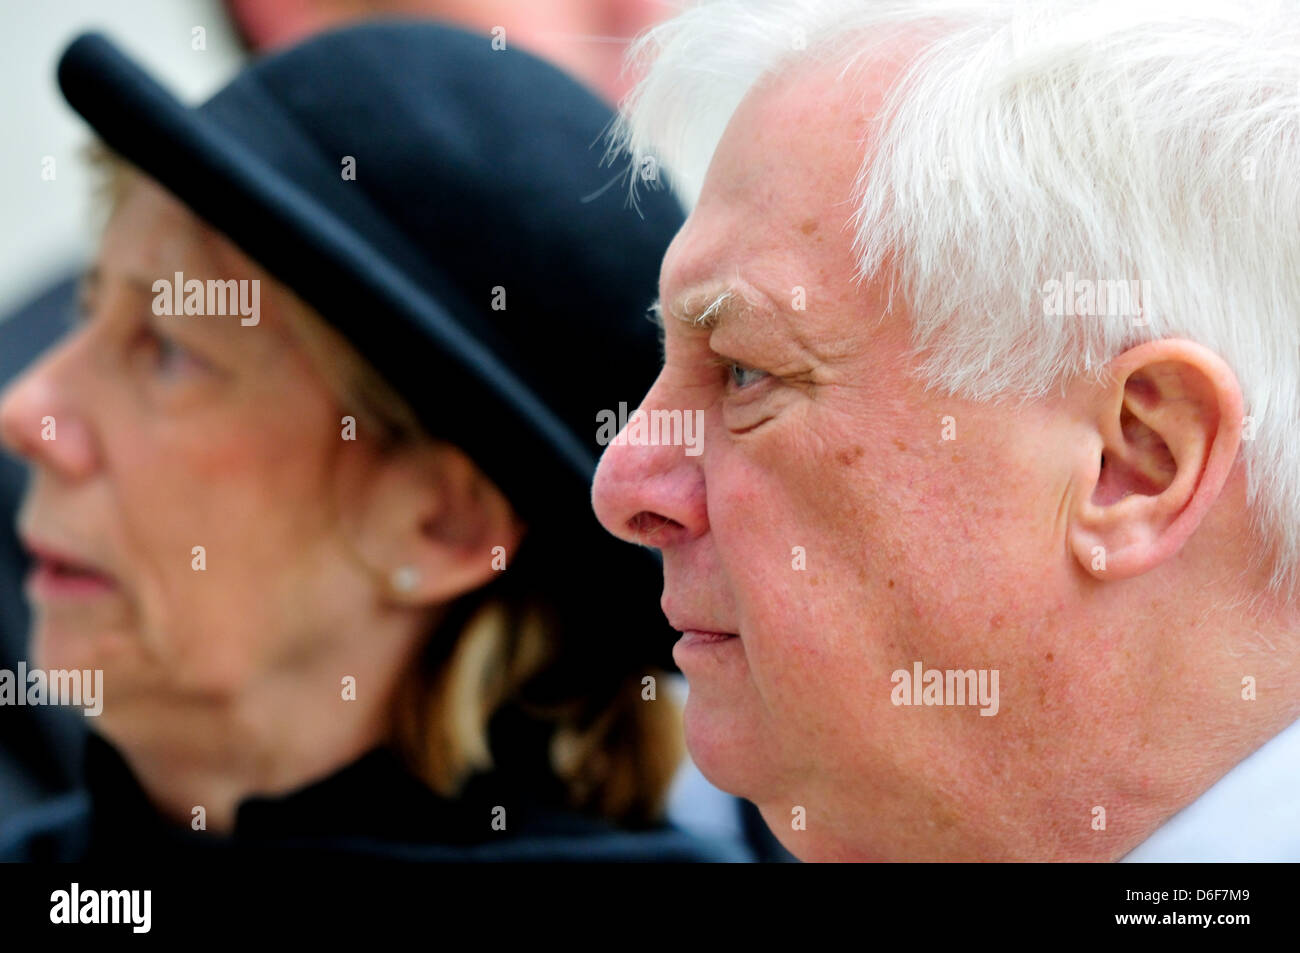 London, UK. 17th April, 2013. Lord Chris Patten  with wife, Lavender Patten, at Margaret Thatcher's funeral at St Paul's Cathedral. Stock Photo